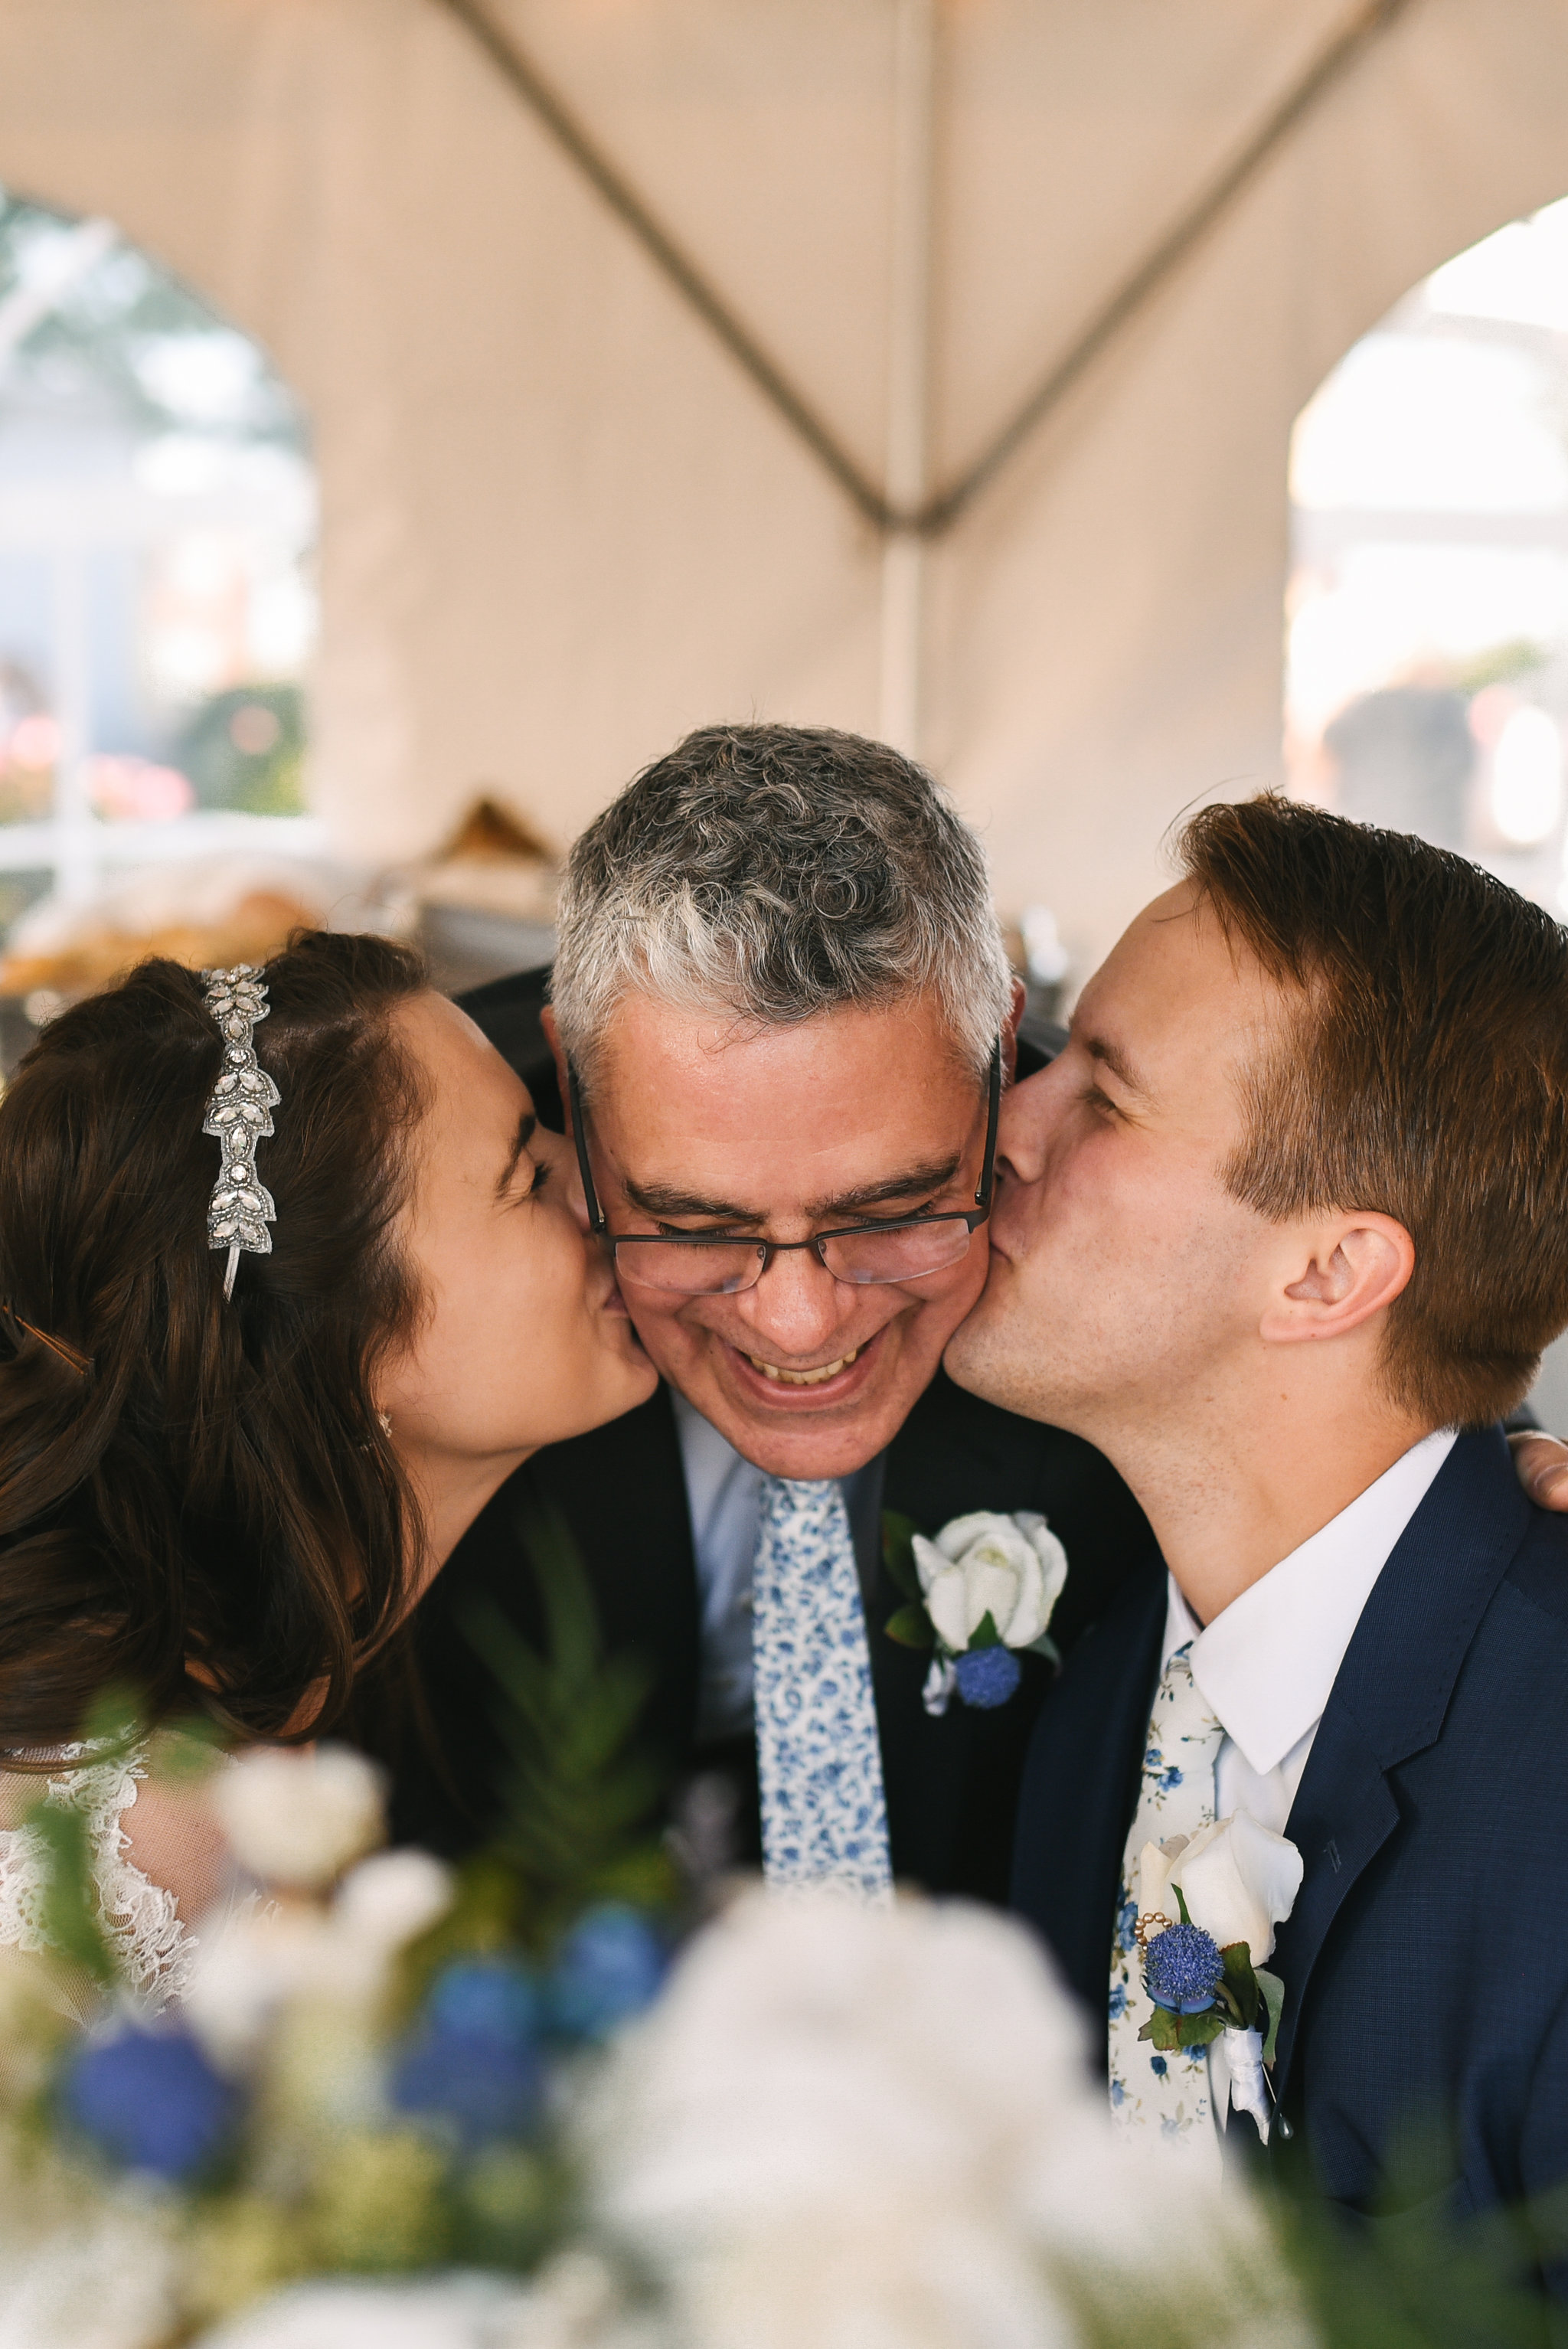  Baltimore, Canton, Modern, Outdoor Reception, Maryland Wedding Photographer, Romantic, Classic, Boston Street Pier Park, Bride and groom kissing father of the bride on the cheek 